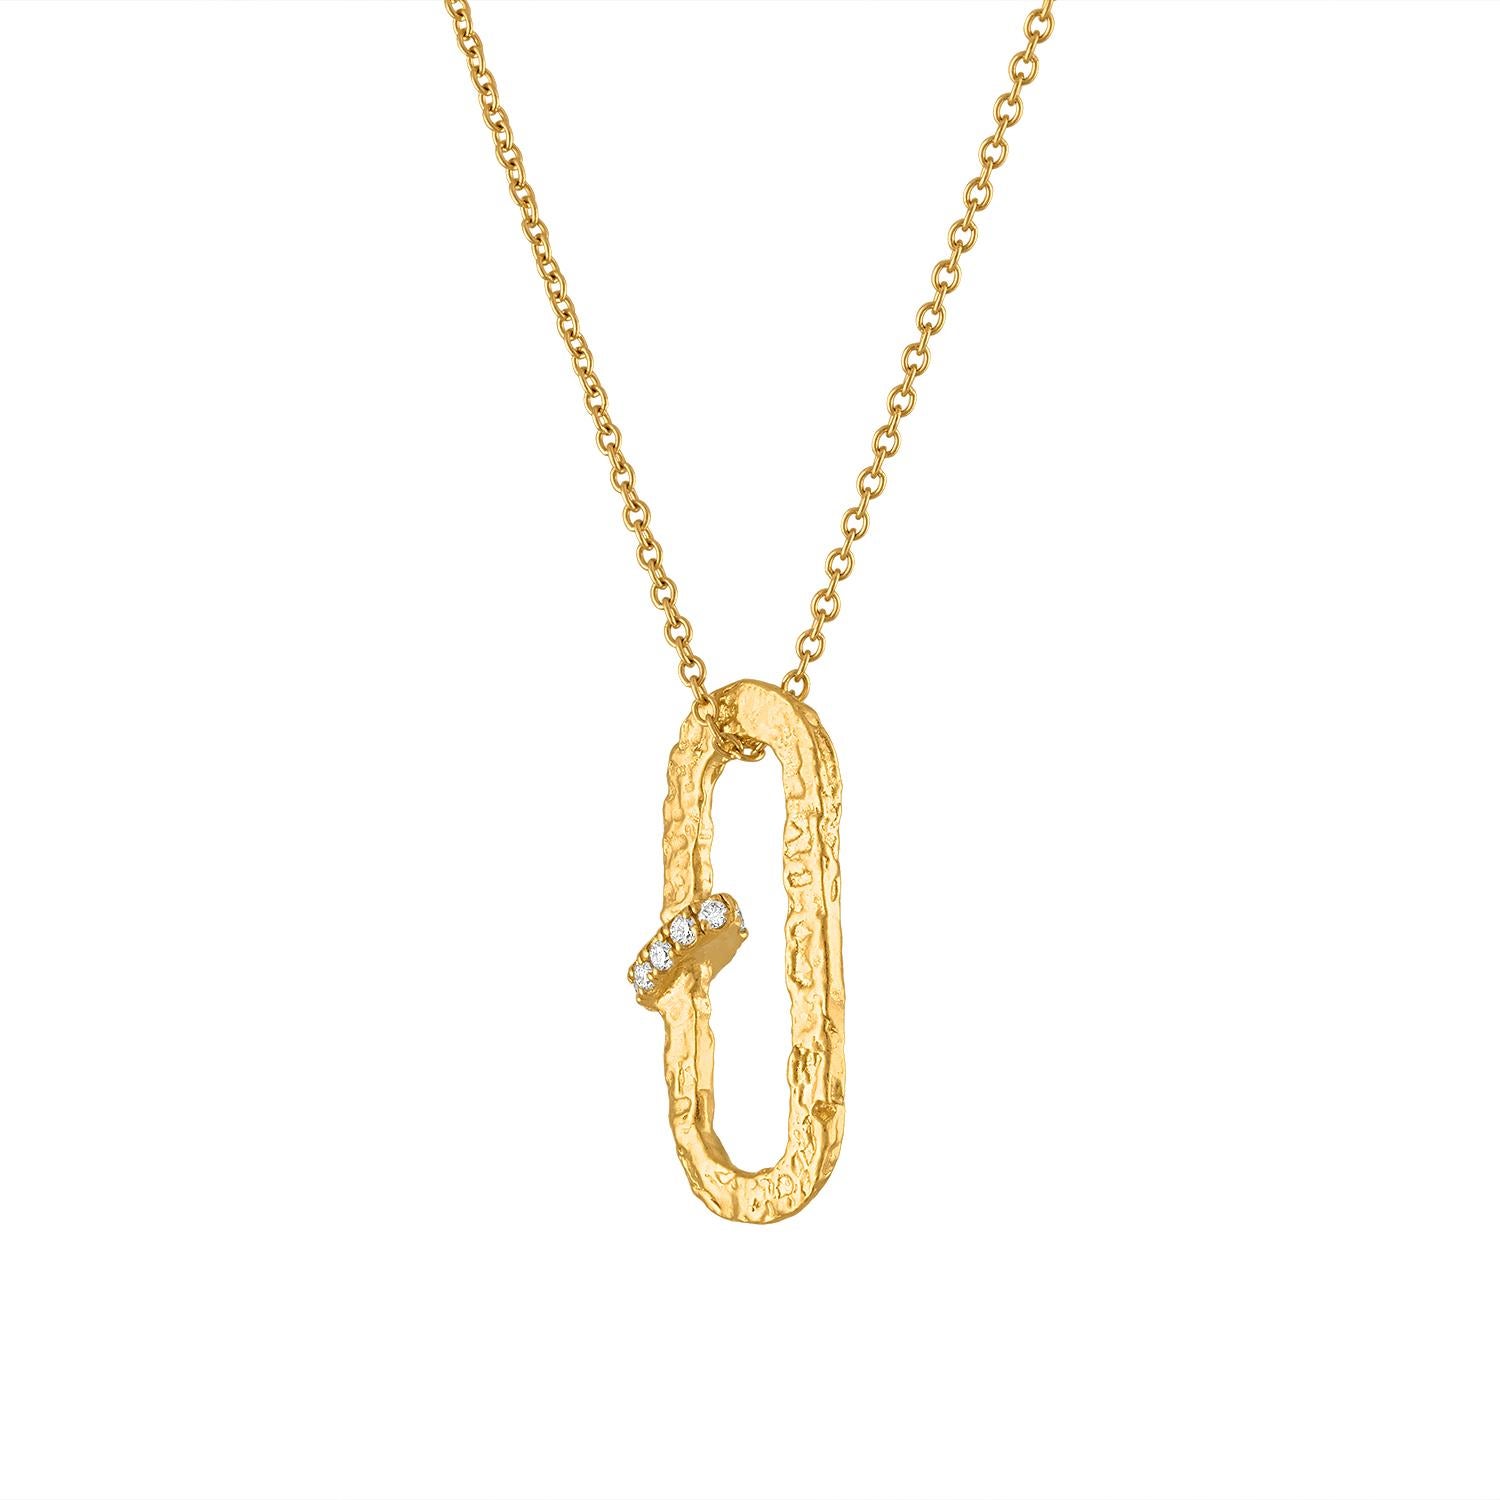 This diamond paperclip necklace is a stunning piece that combines modern design with timeless elegance. The necklace features a delicate paperclip adorned with diamonds, creating a look that is both eye catching and sophisticated. Hand made in 22k